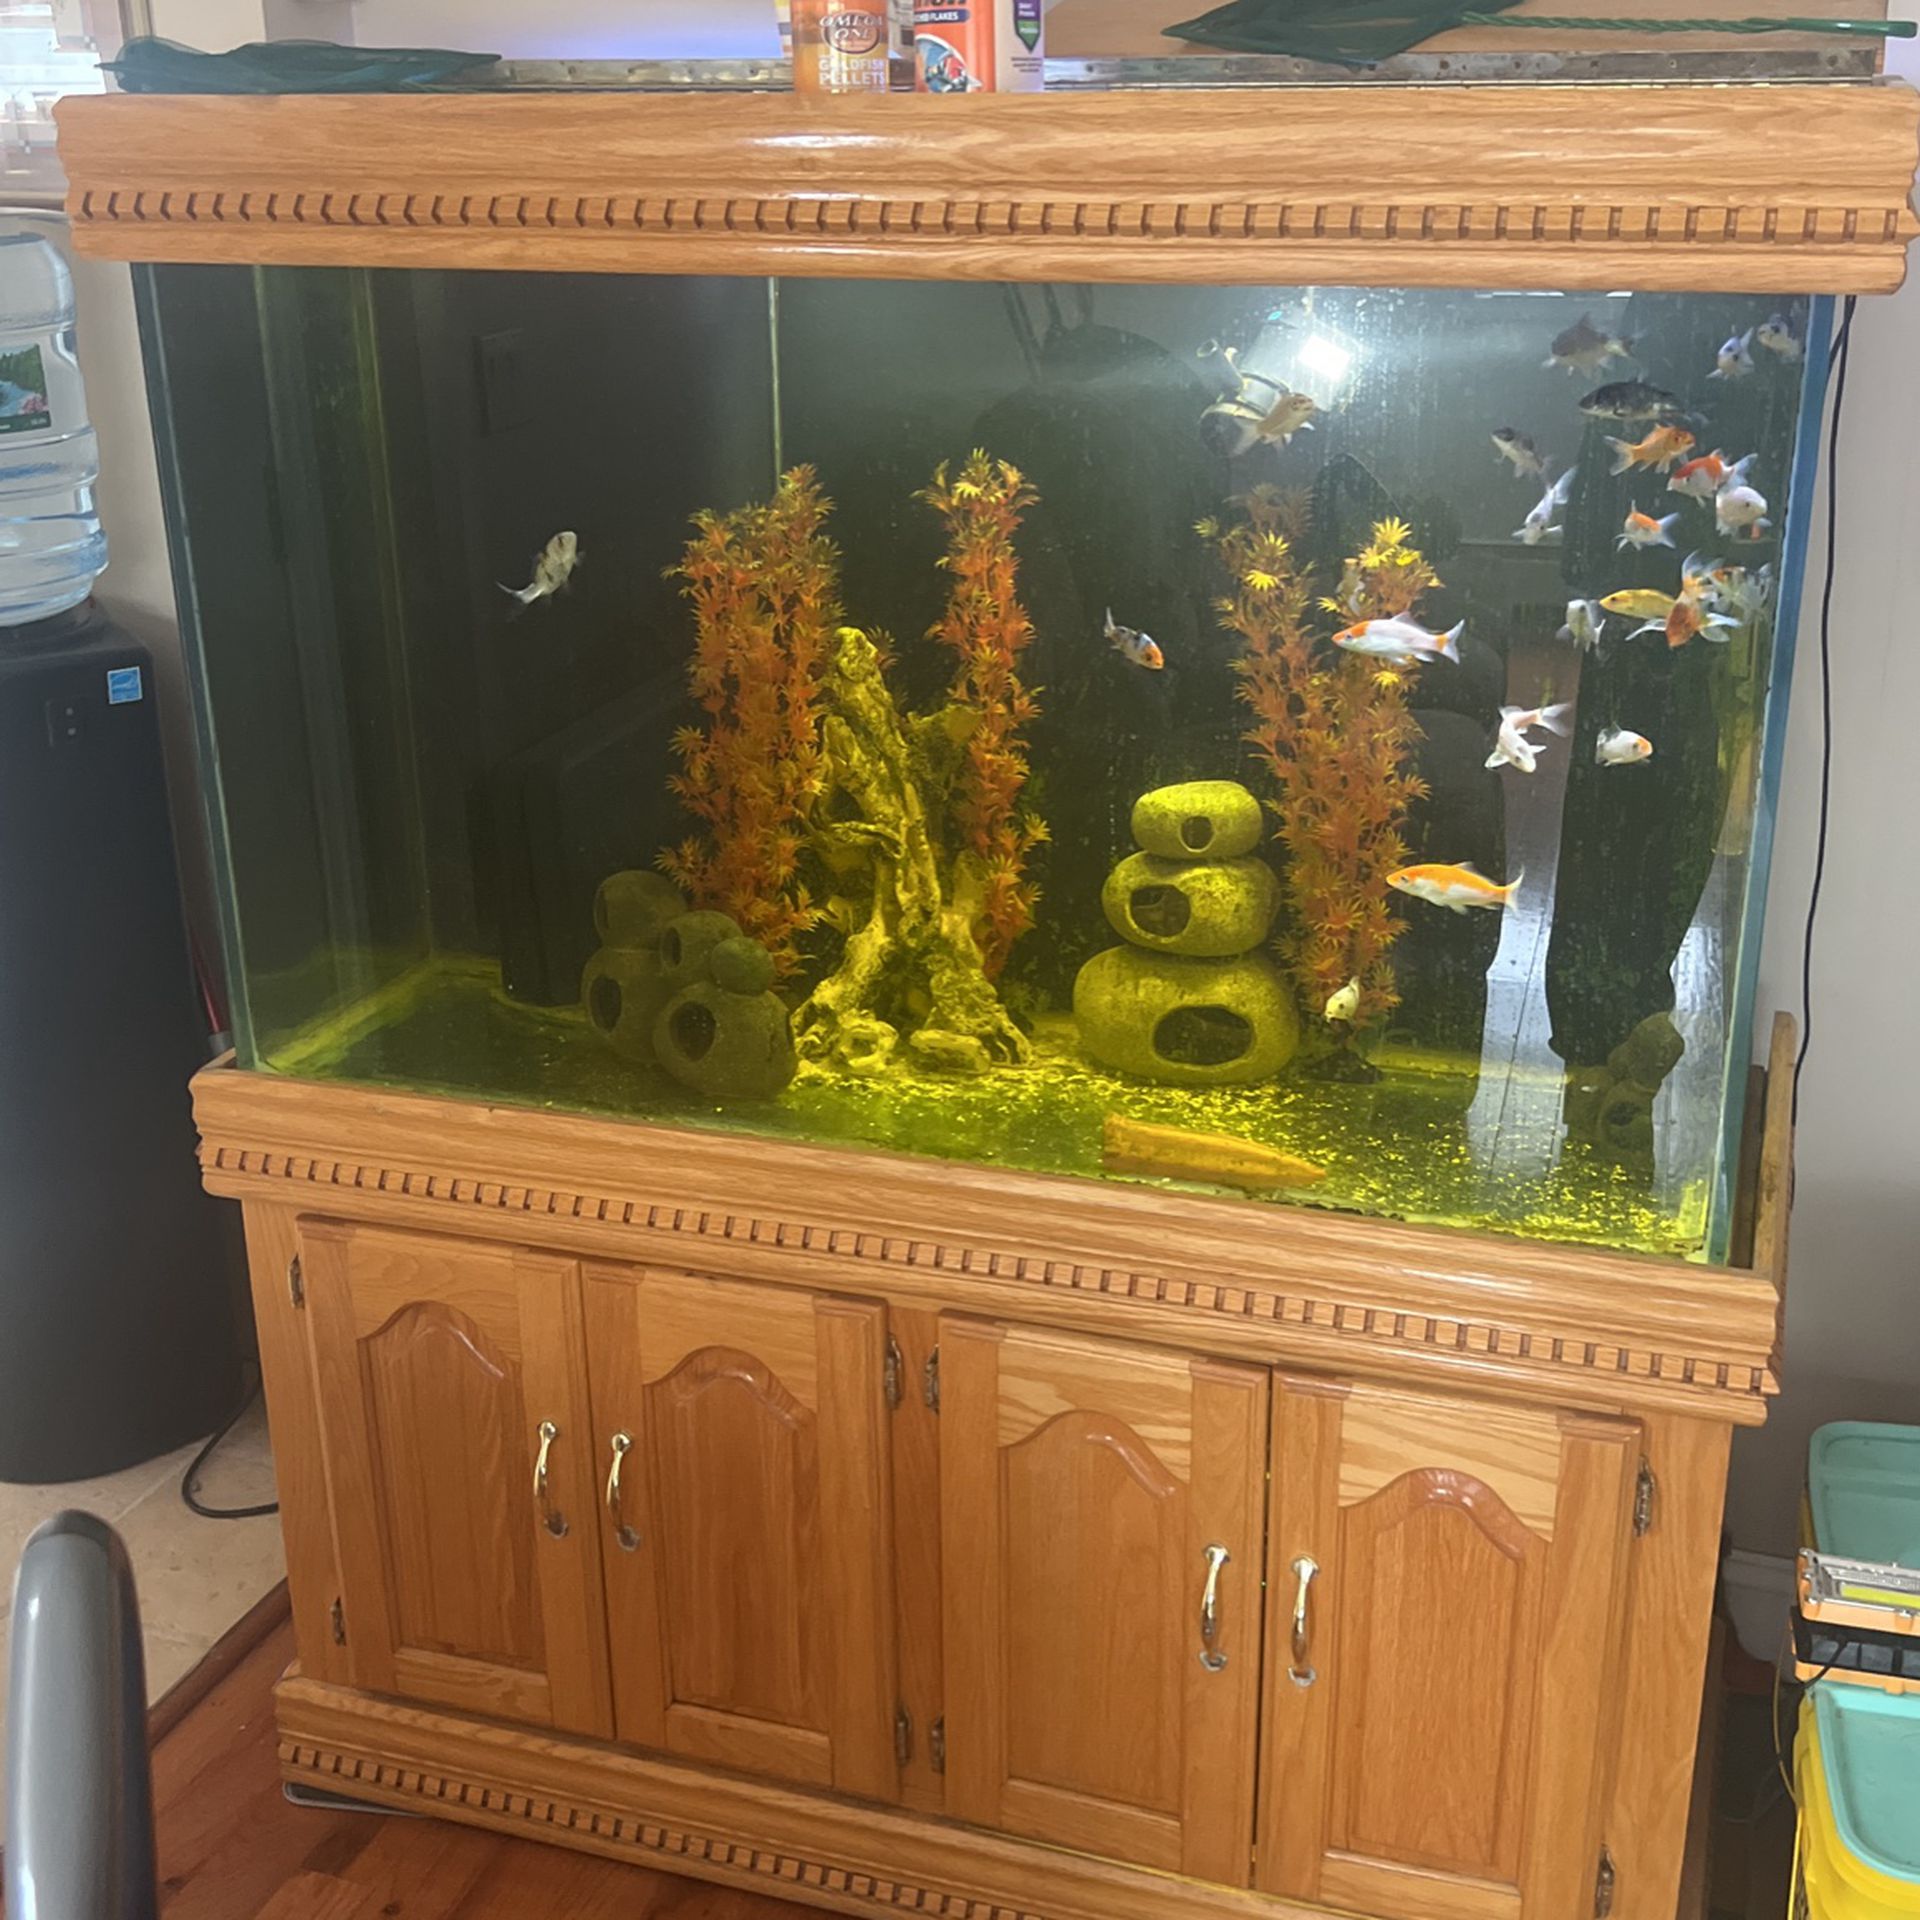 100 gallon fish tank with oak stand and Top and underneath filter